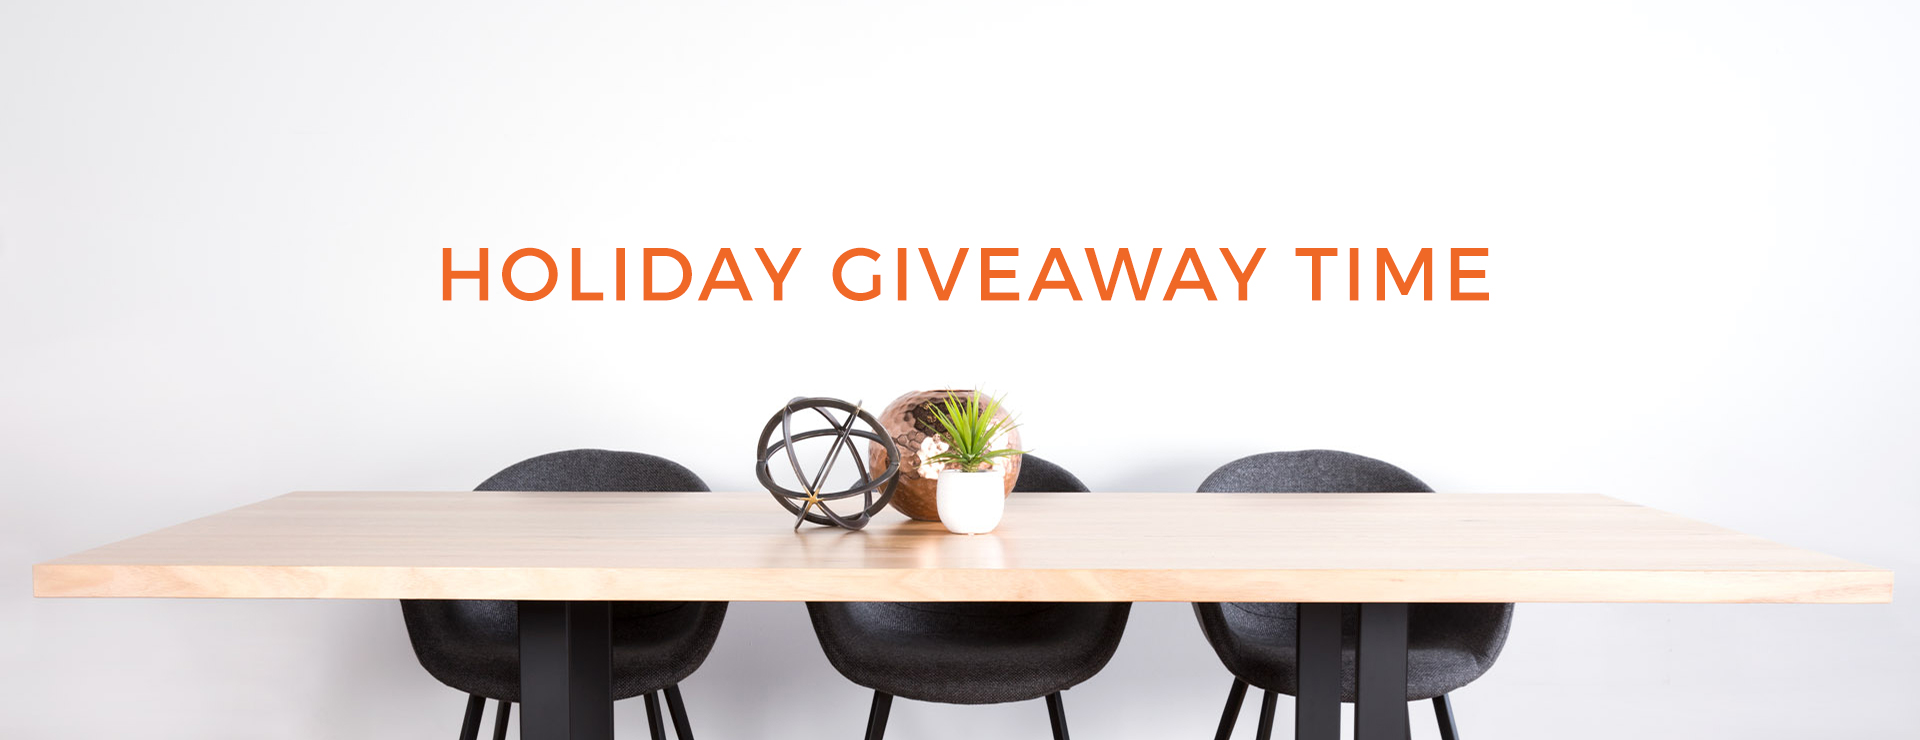 MASSIVE Holiday Giveaway Time!